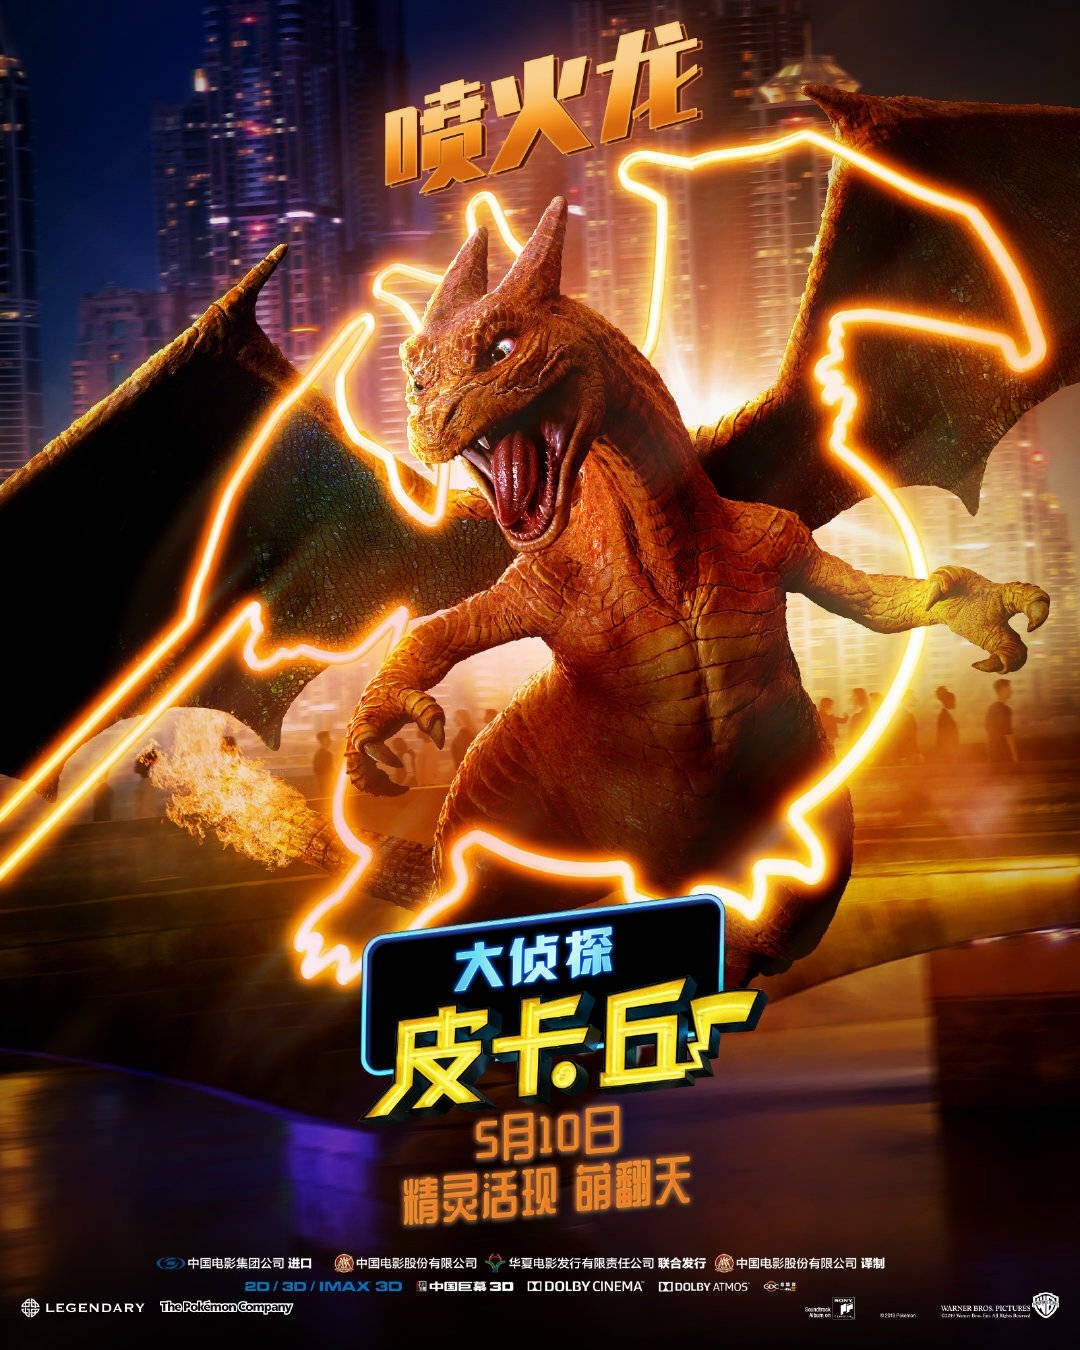 Extra Large Movie Poster Image for Pokémon Detective Pikachu (#9 of 26)